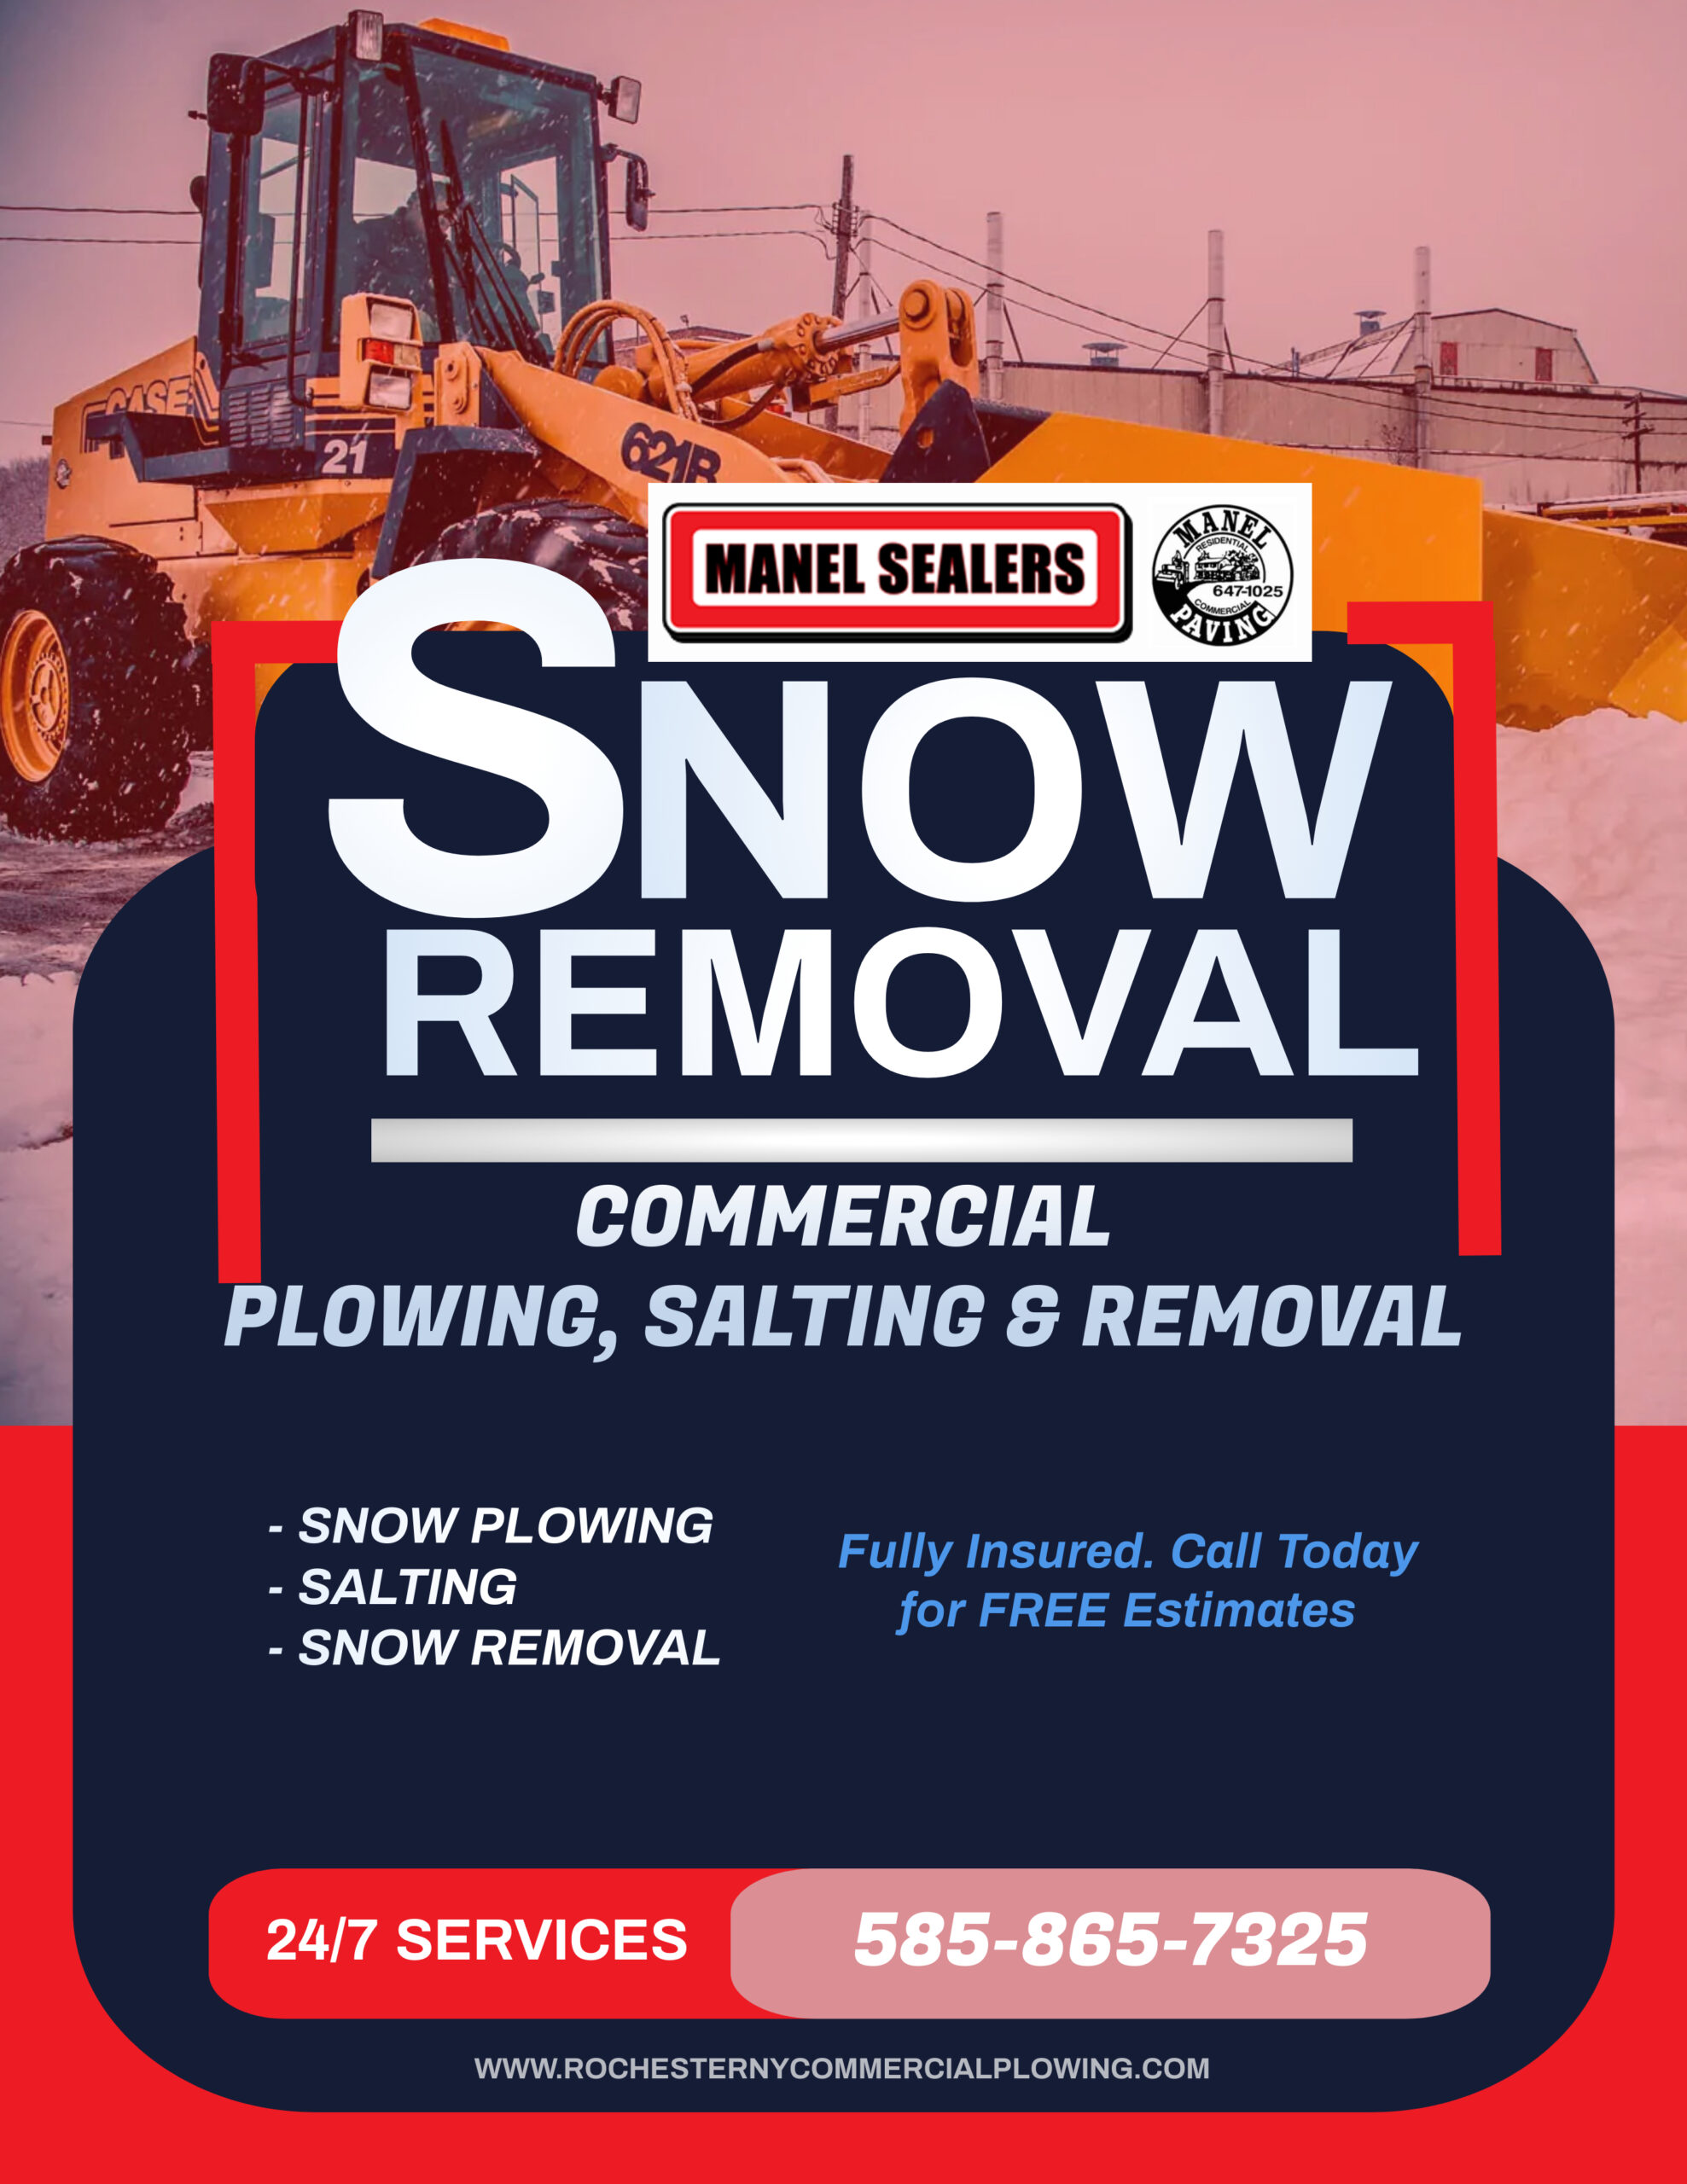 commercial-snow-plowing-and-removal-manel-sealers